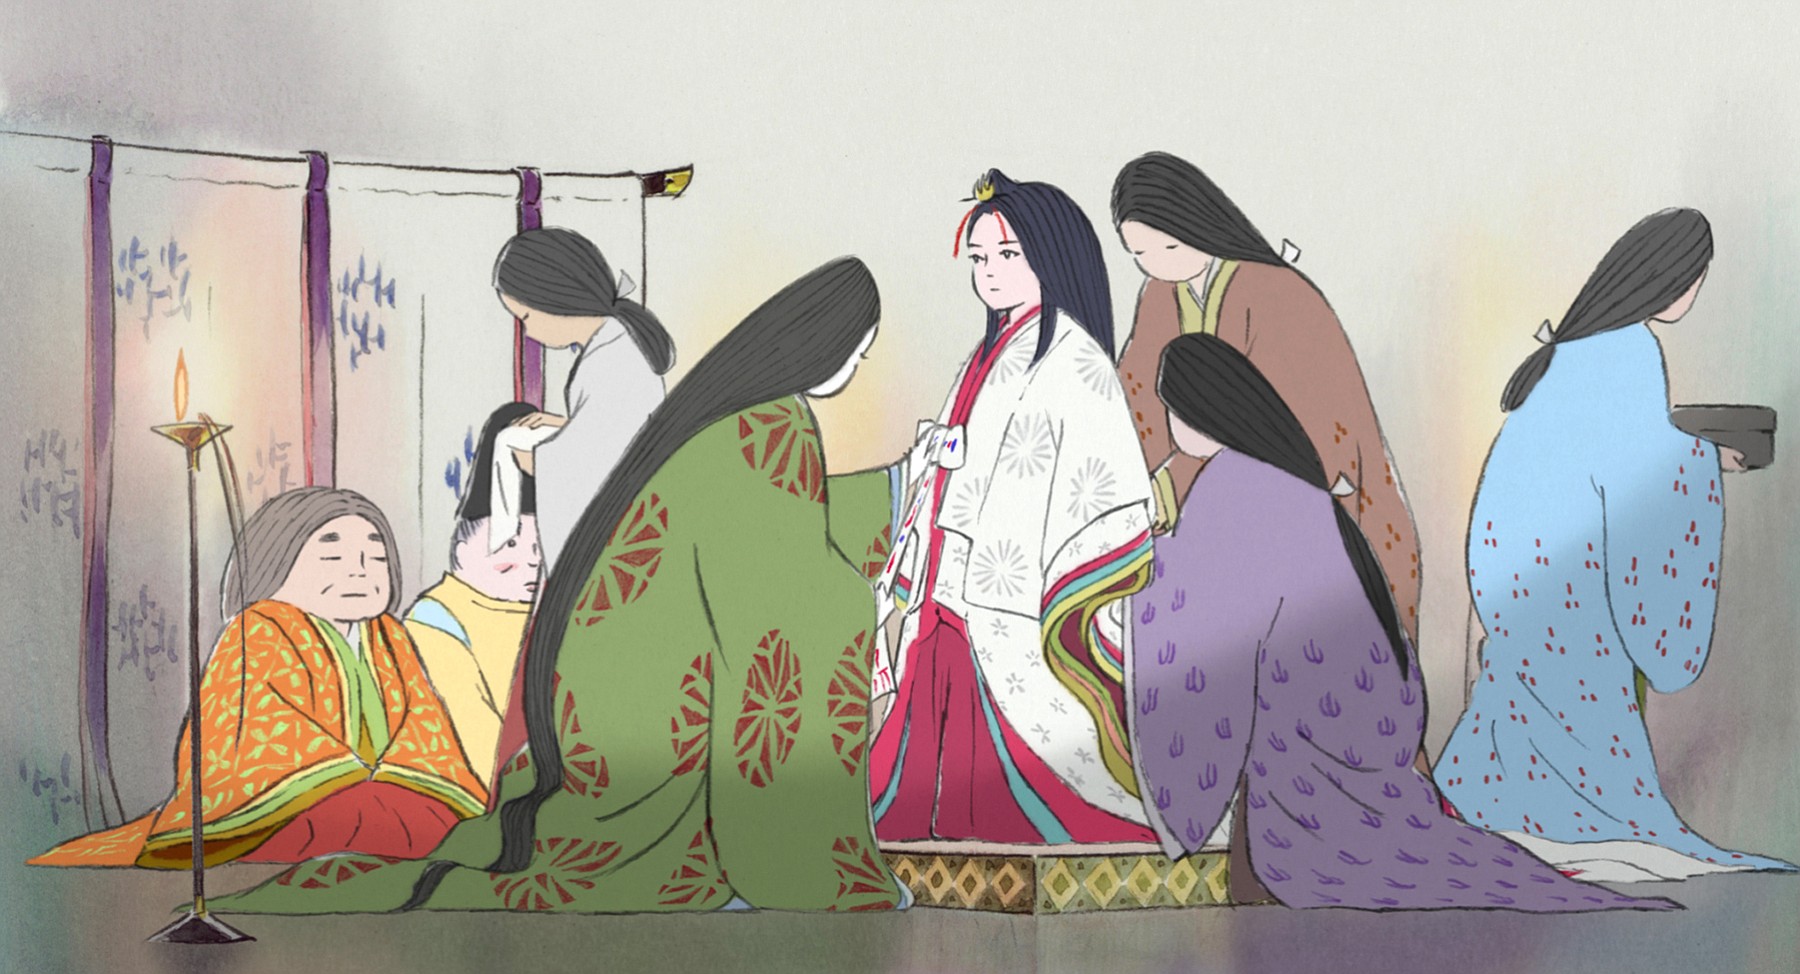 Chloe Grace Moretz gives voice to the title character in the dubbed version of the animated &quot;The Tale of Princess Kaguya.&quot;